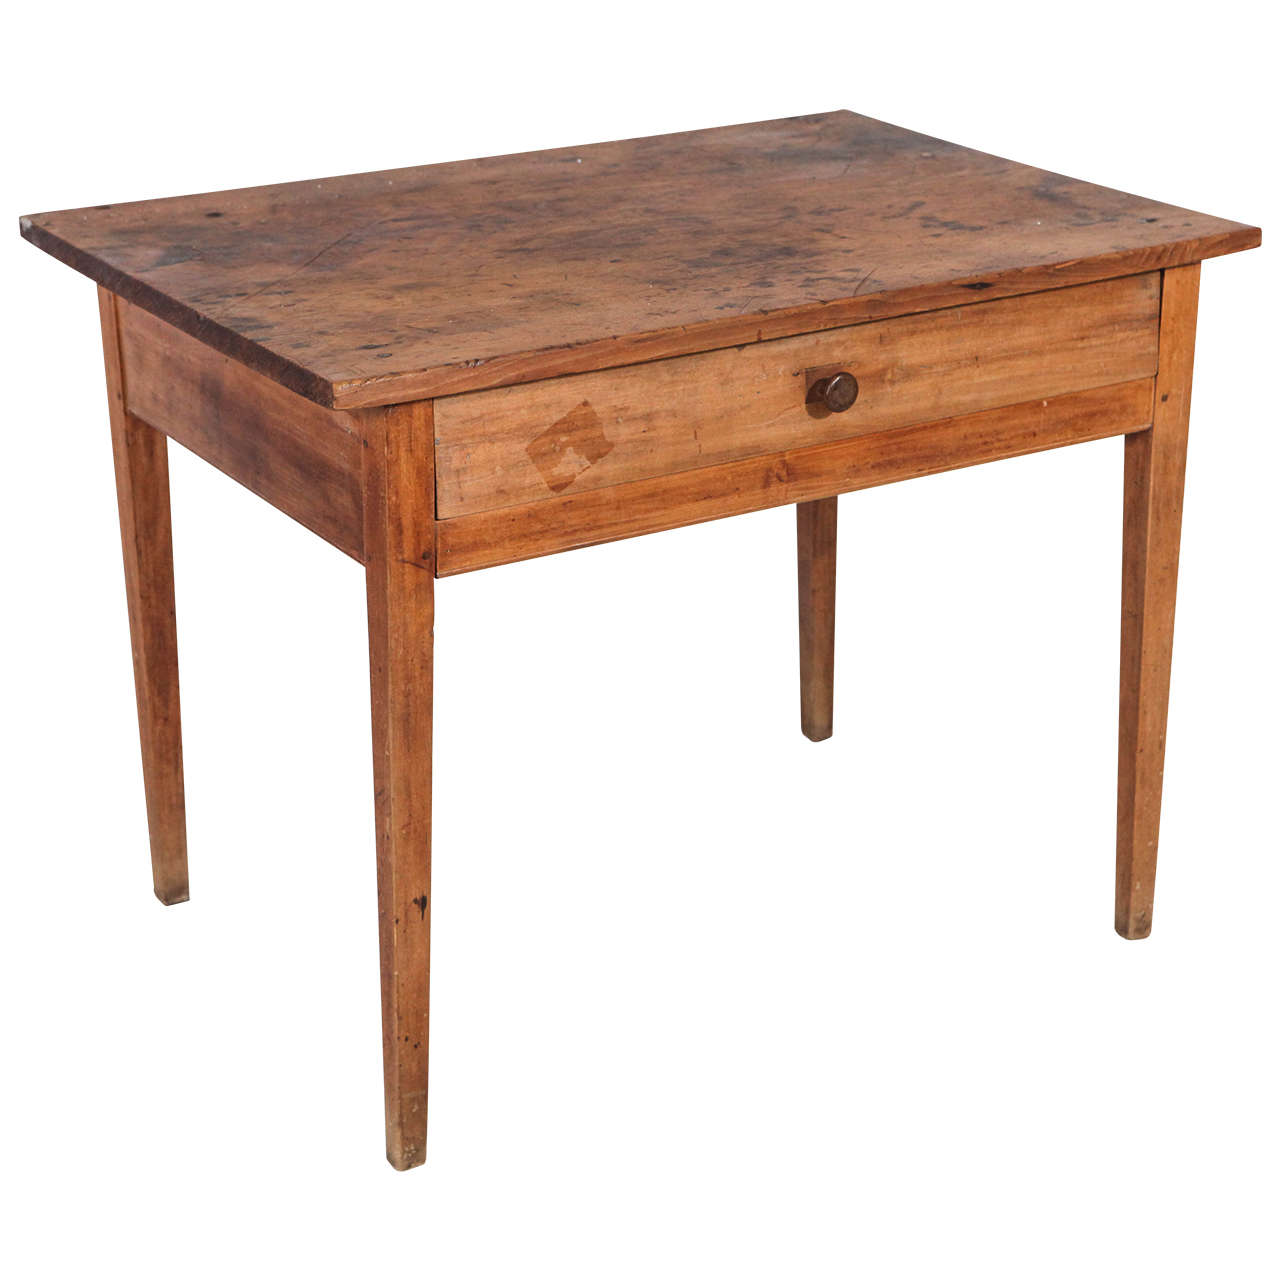 Low Rustic One-Drawer Occasional Table